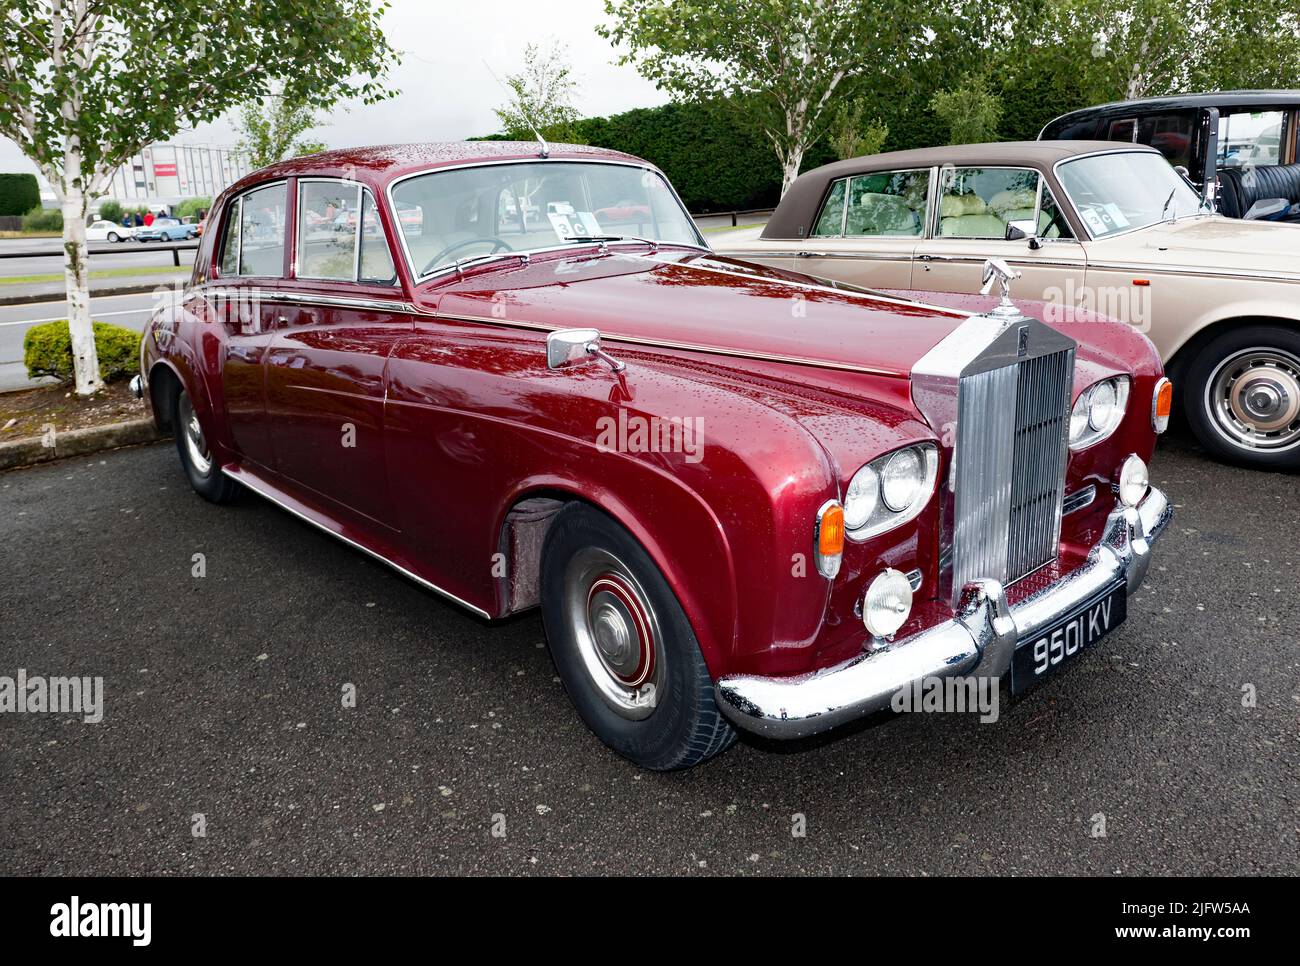 Three-quarters front view of a Red, 1963, Rolls-Royce Silver Cloud MkIII, on display at the 2021 Silverstone Classic Stock Photo